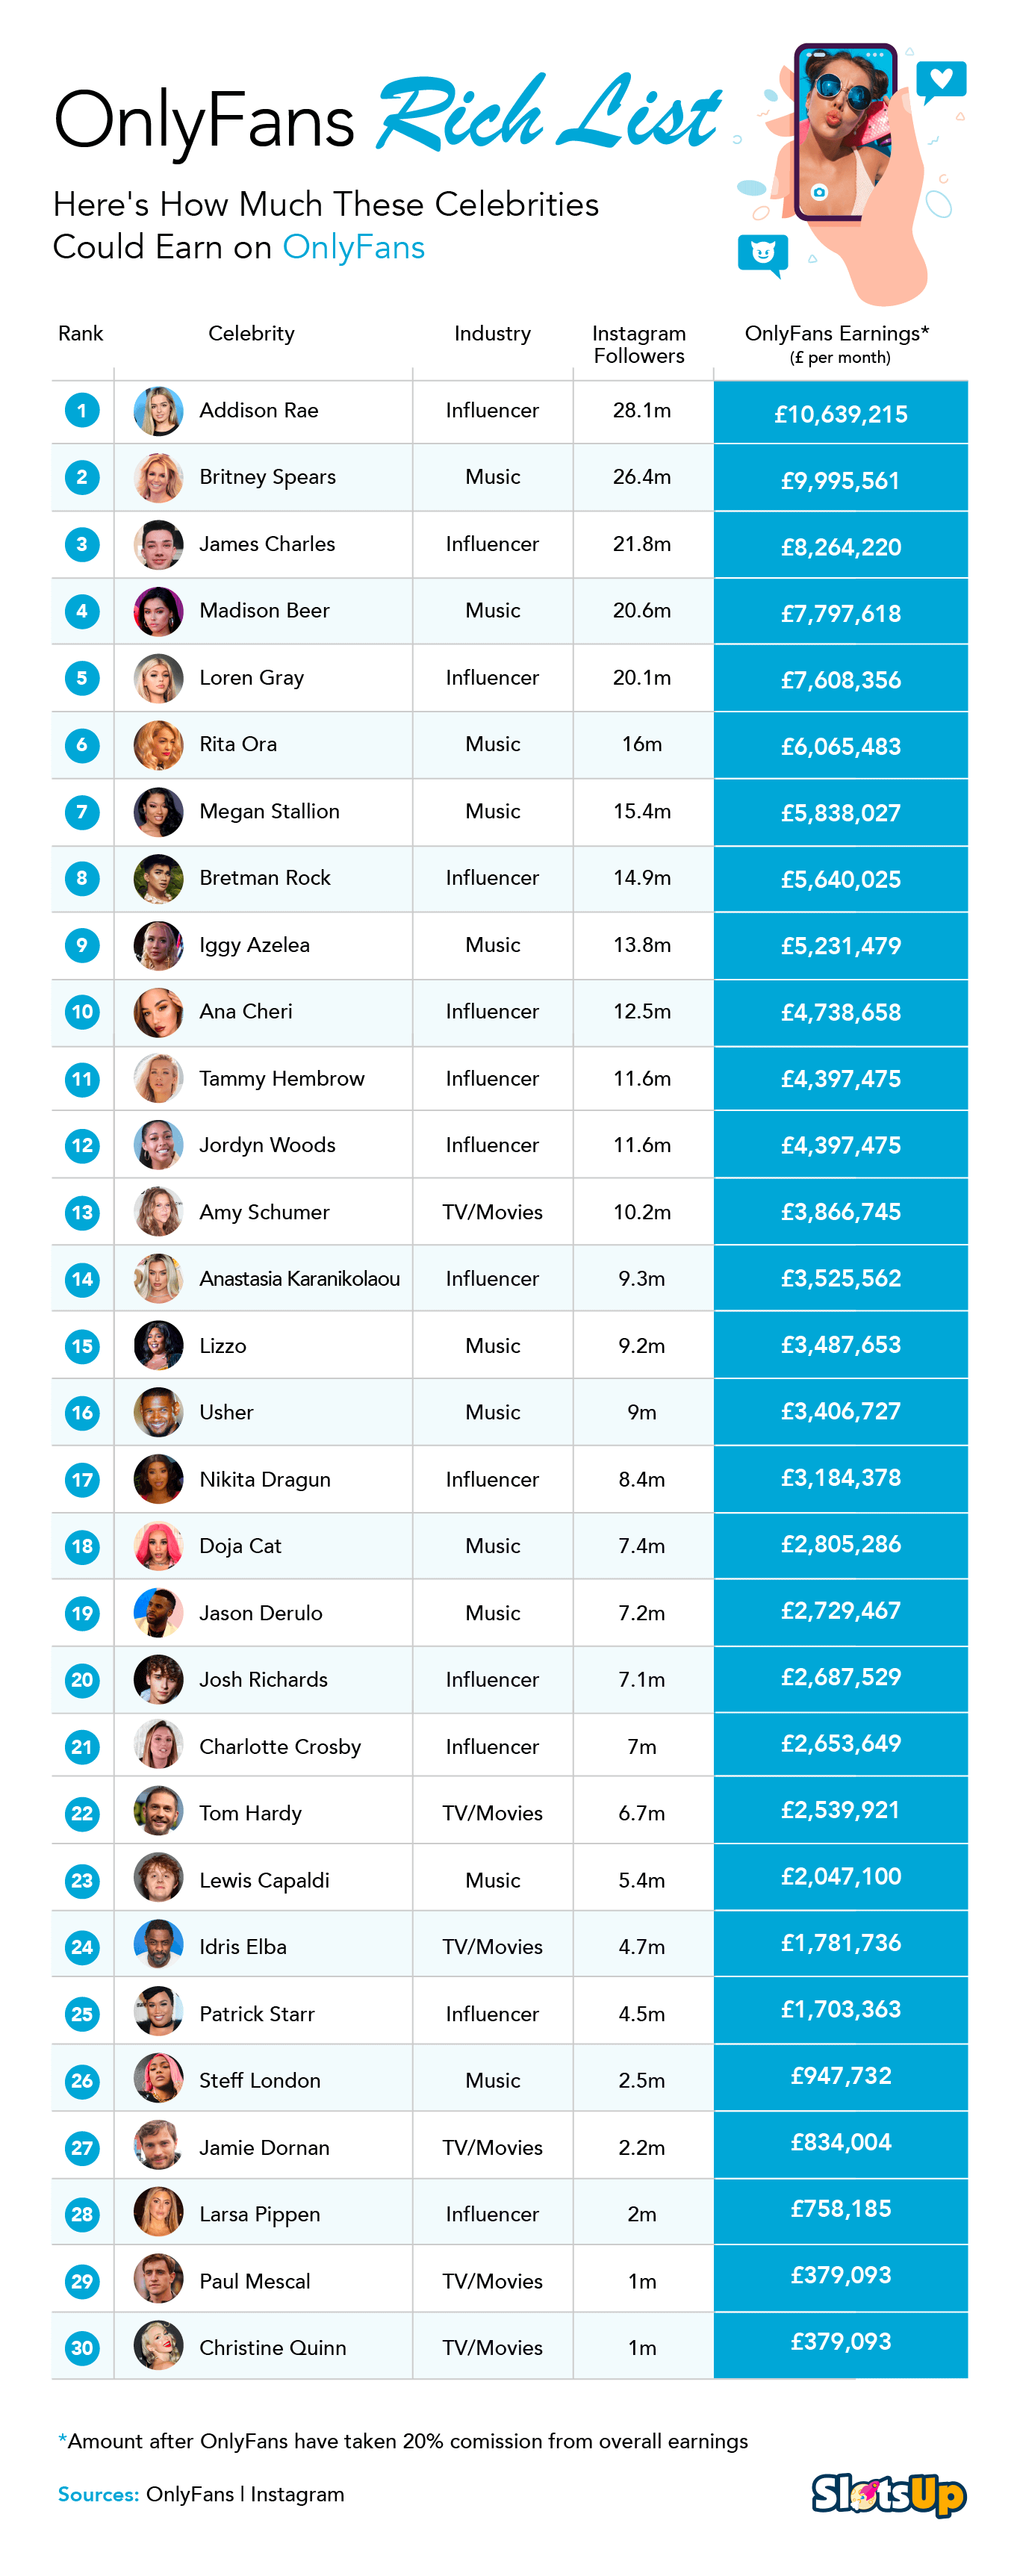 How Much Celebrities Could Earn Using OnlyFans